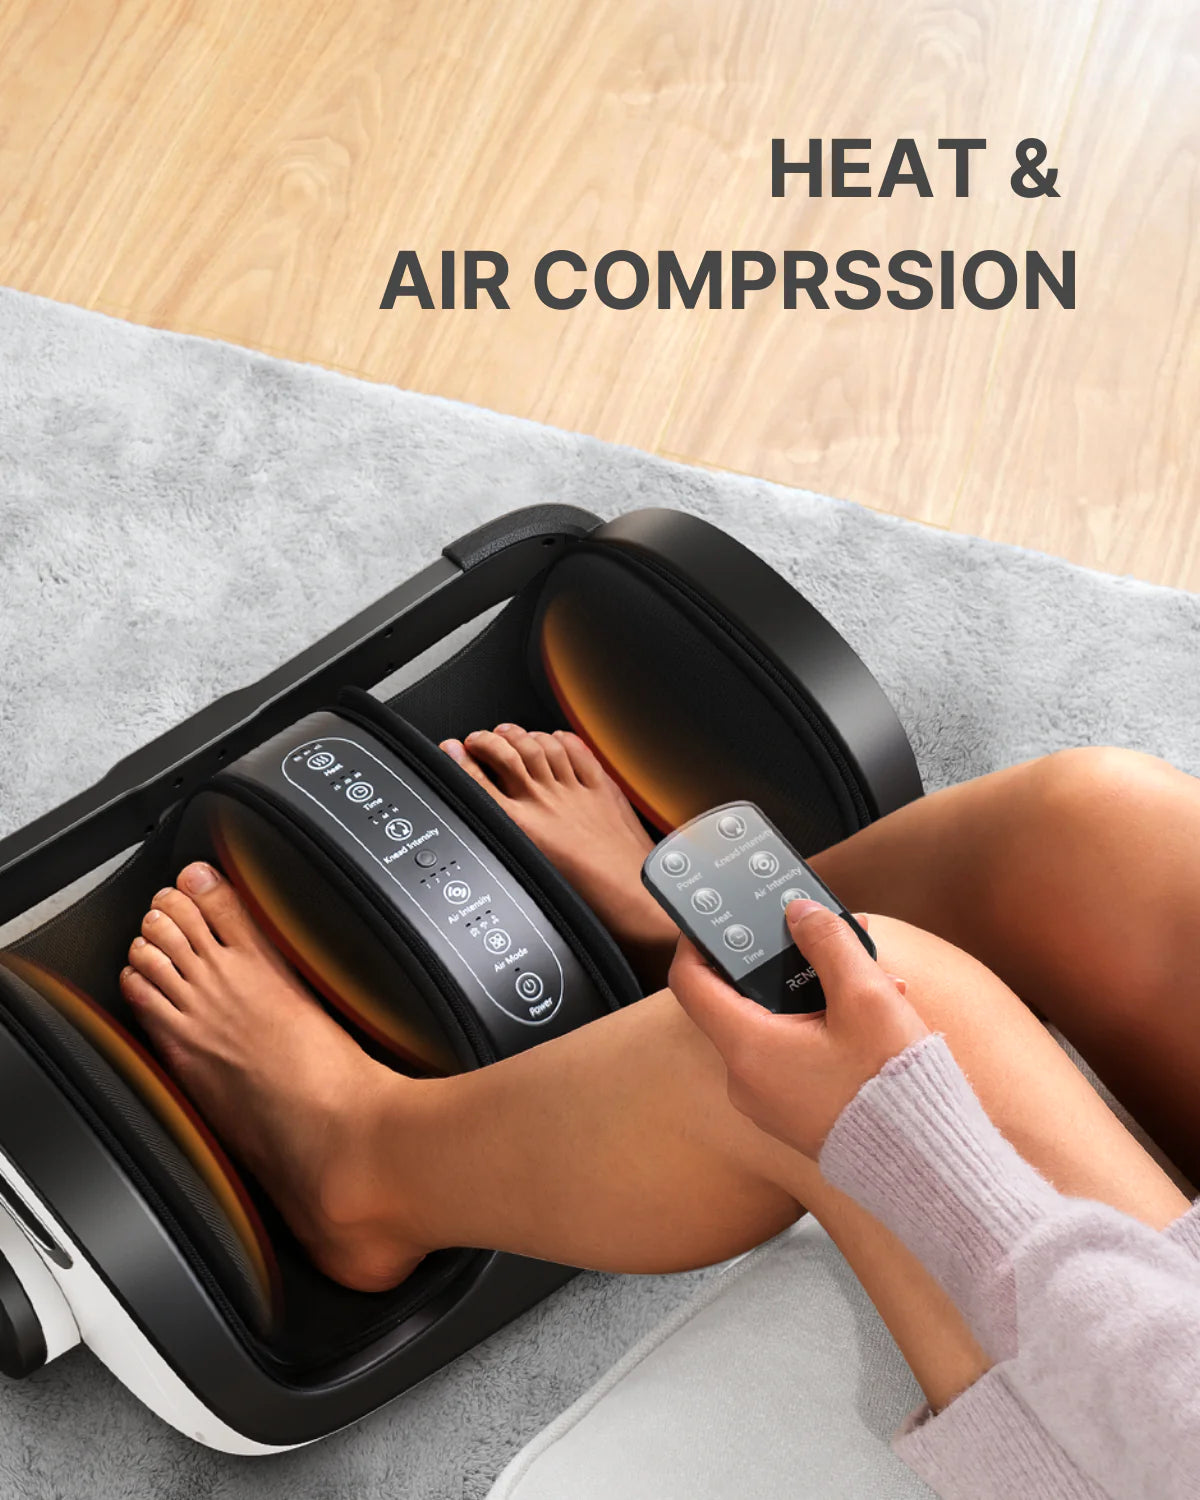 Person's feet inside a black and gray *Renpho EU Shiatsu Foot and Calf Massager* on a light gray carpet, using a remote control. The massager has digital controls and is designed for heat and air compression. Text at the top right reads, "Heat & Air Compression.